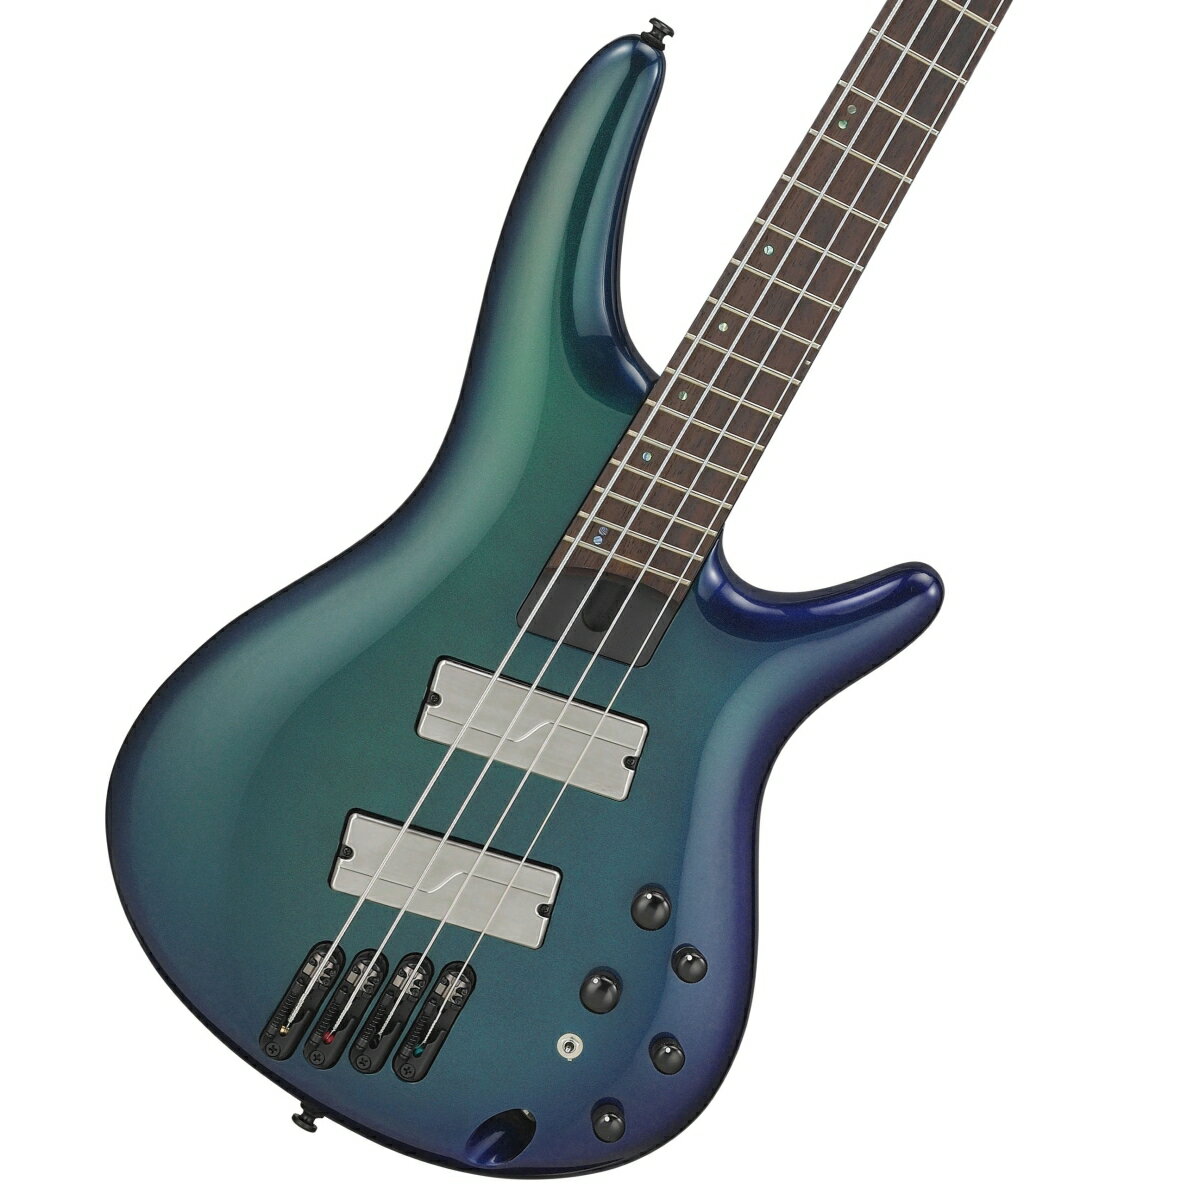 Ibanez / Work Shop Series SRMS720-BCM (Blue Chameleon) アイバニーズ [限定モデル] 《お取り寄せ商品/納期別途ご…